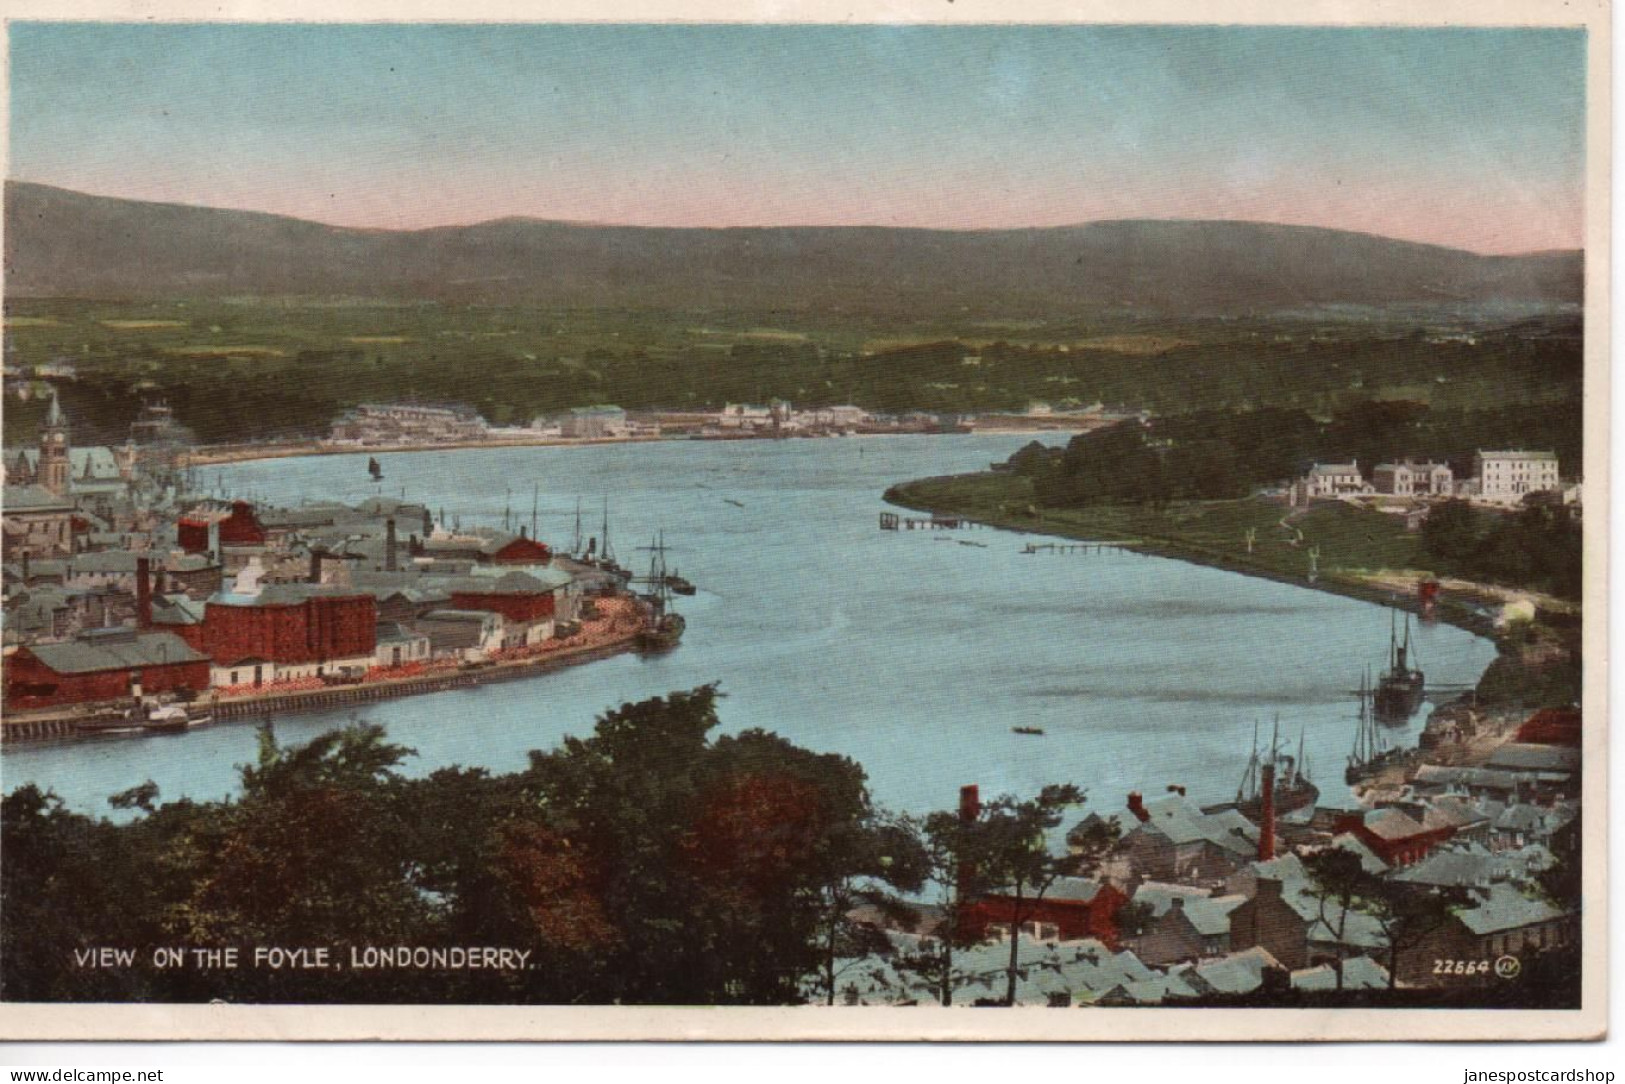 COLOURED POSTCARD - VIEW ON THE FOYLE - LONDONDERRY - NORTHERN IRELAND - Londonderry